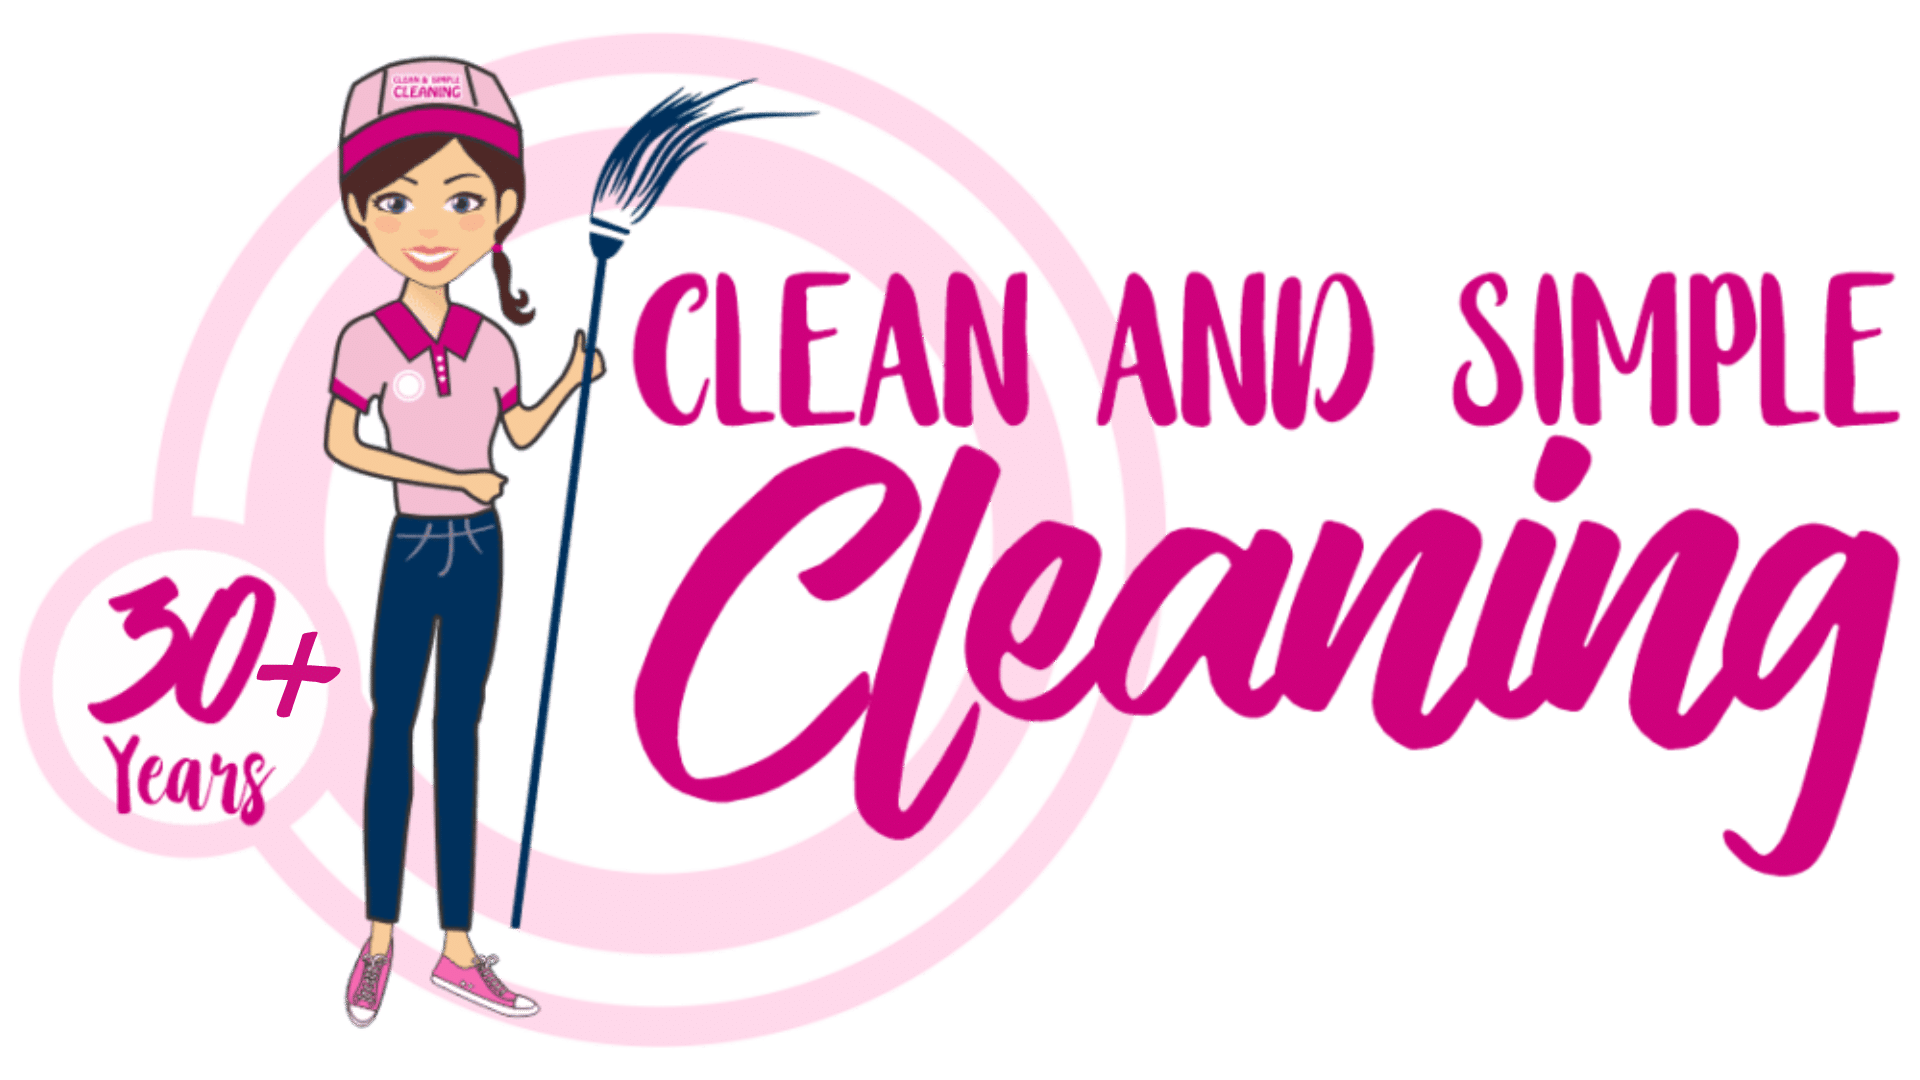 house-cleaning-services-clean-and-simple-cleaning